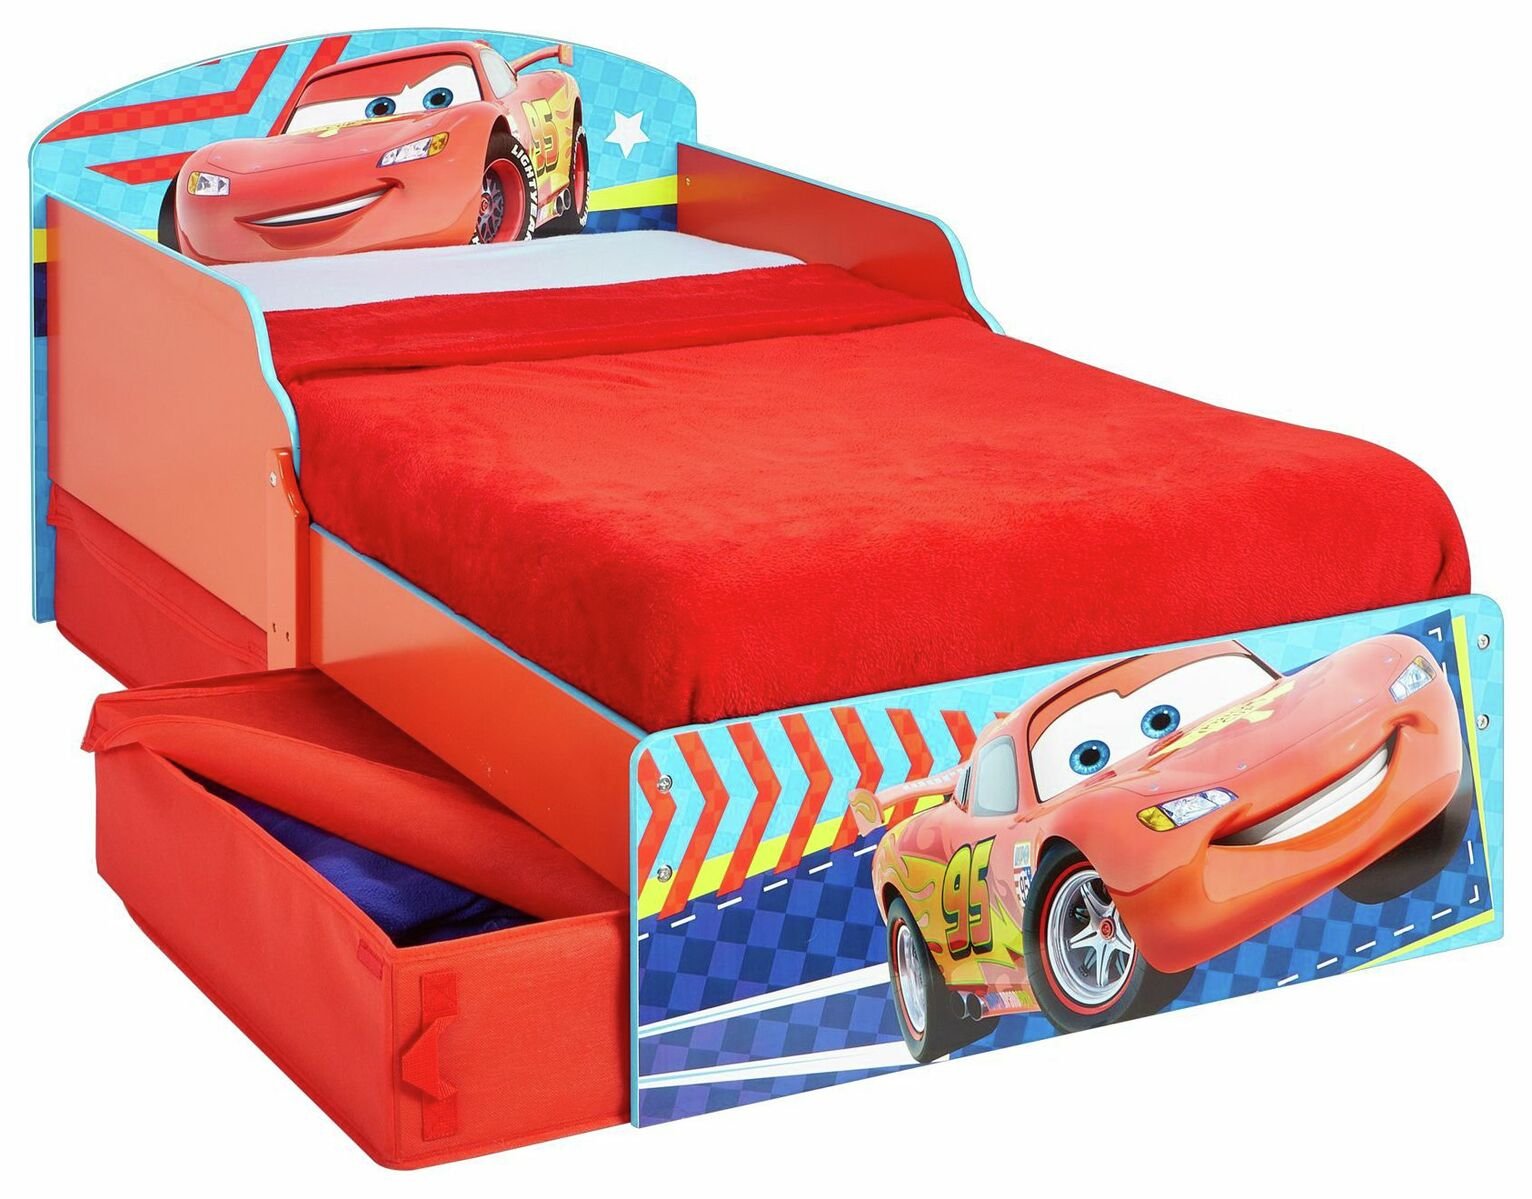 Disney Cars Toddler Bed with Drawers Review